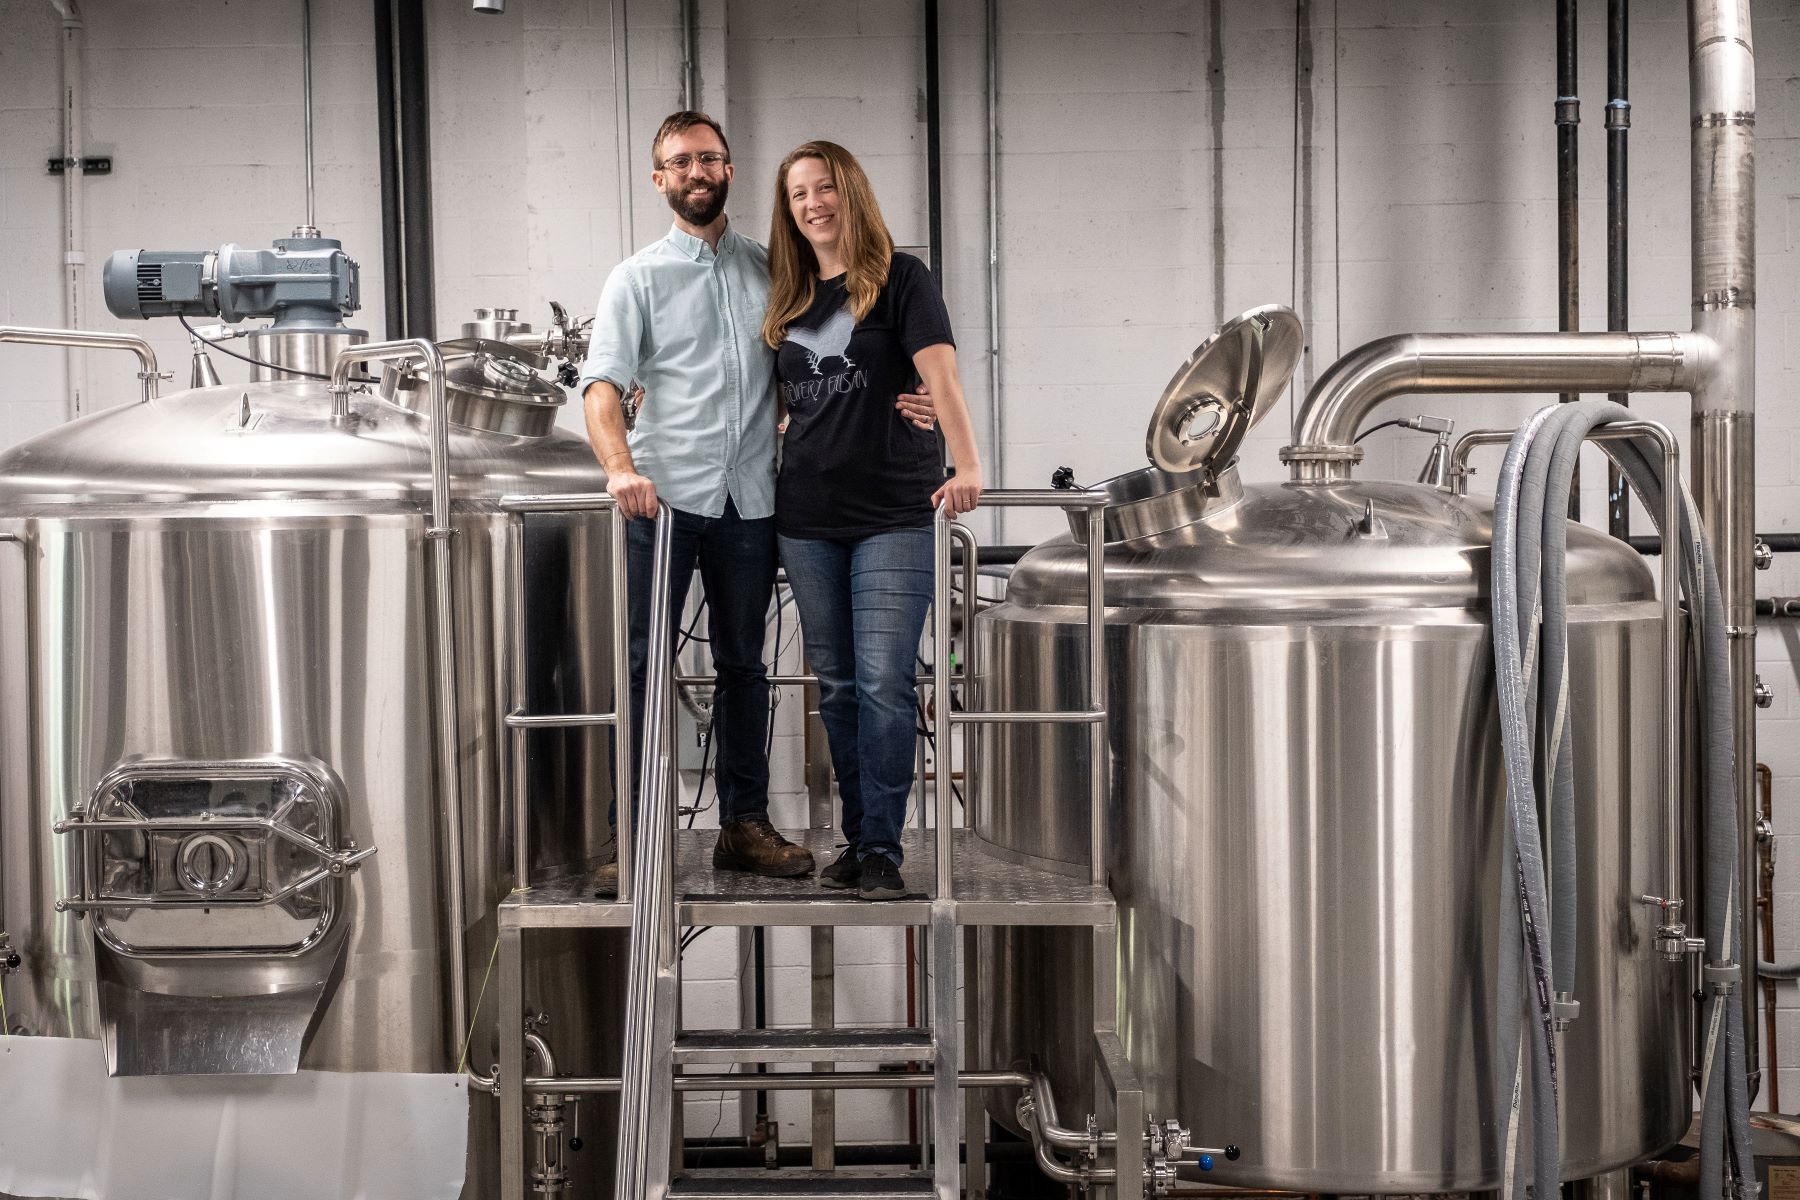 Rachel and Paul atop the brewhouse.